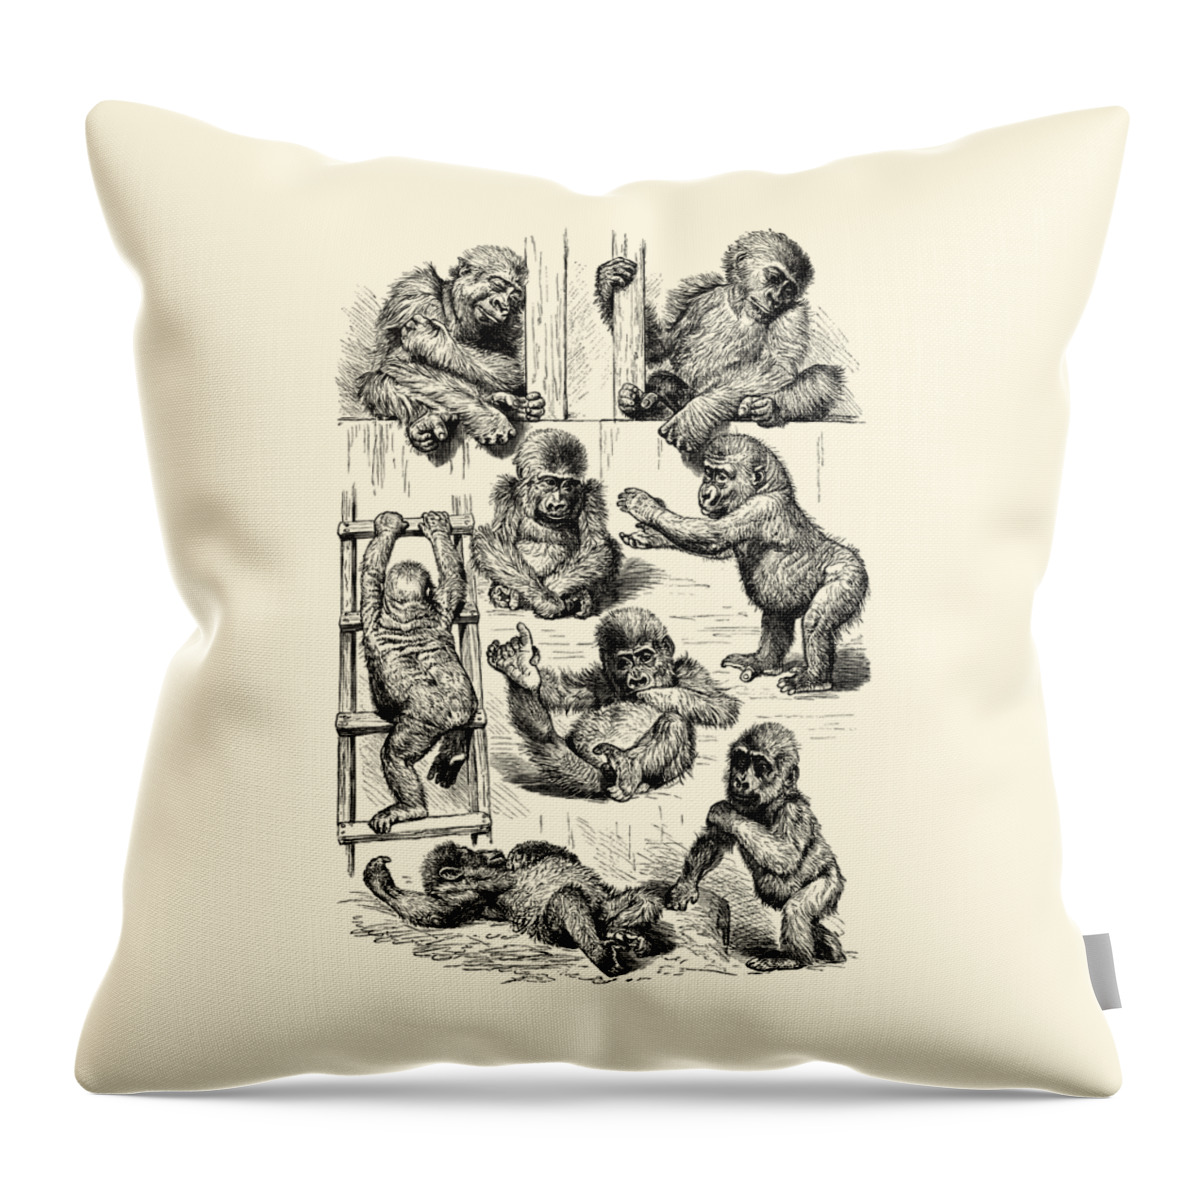 Monkey Throw Pillow featuring the digital art Monkey babies by Madame Memento